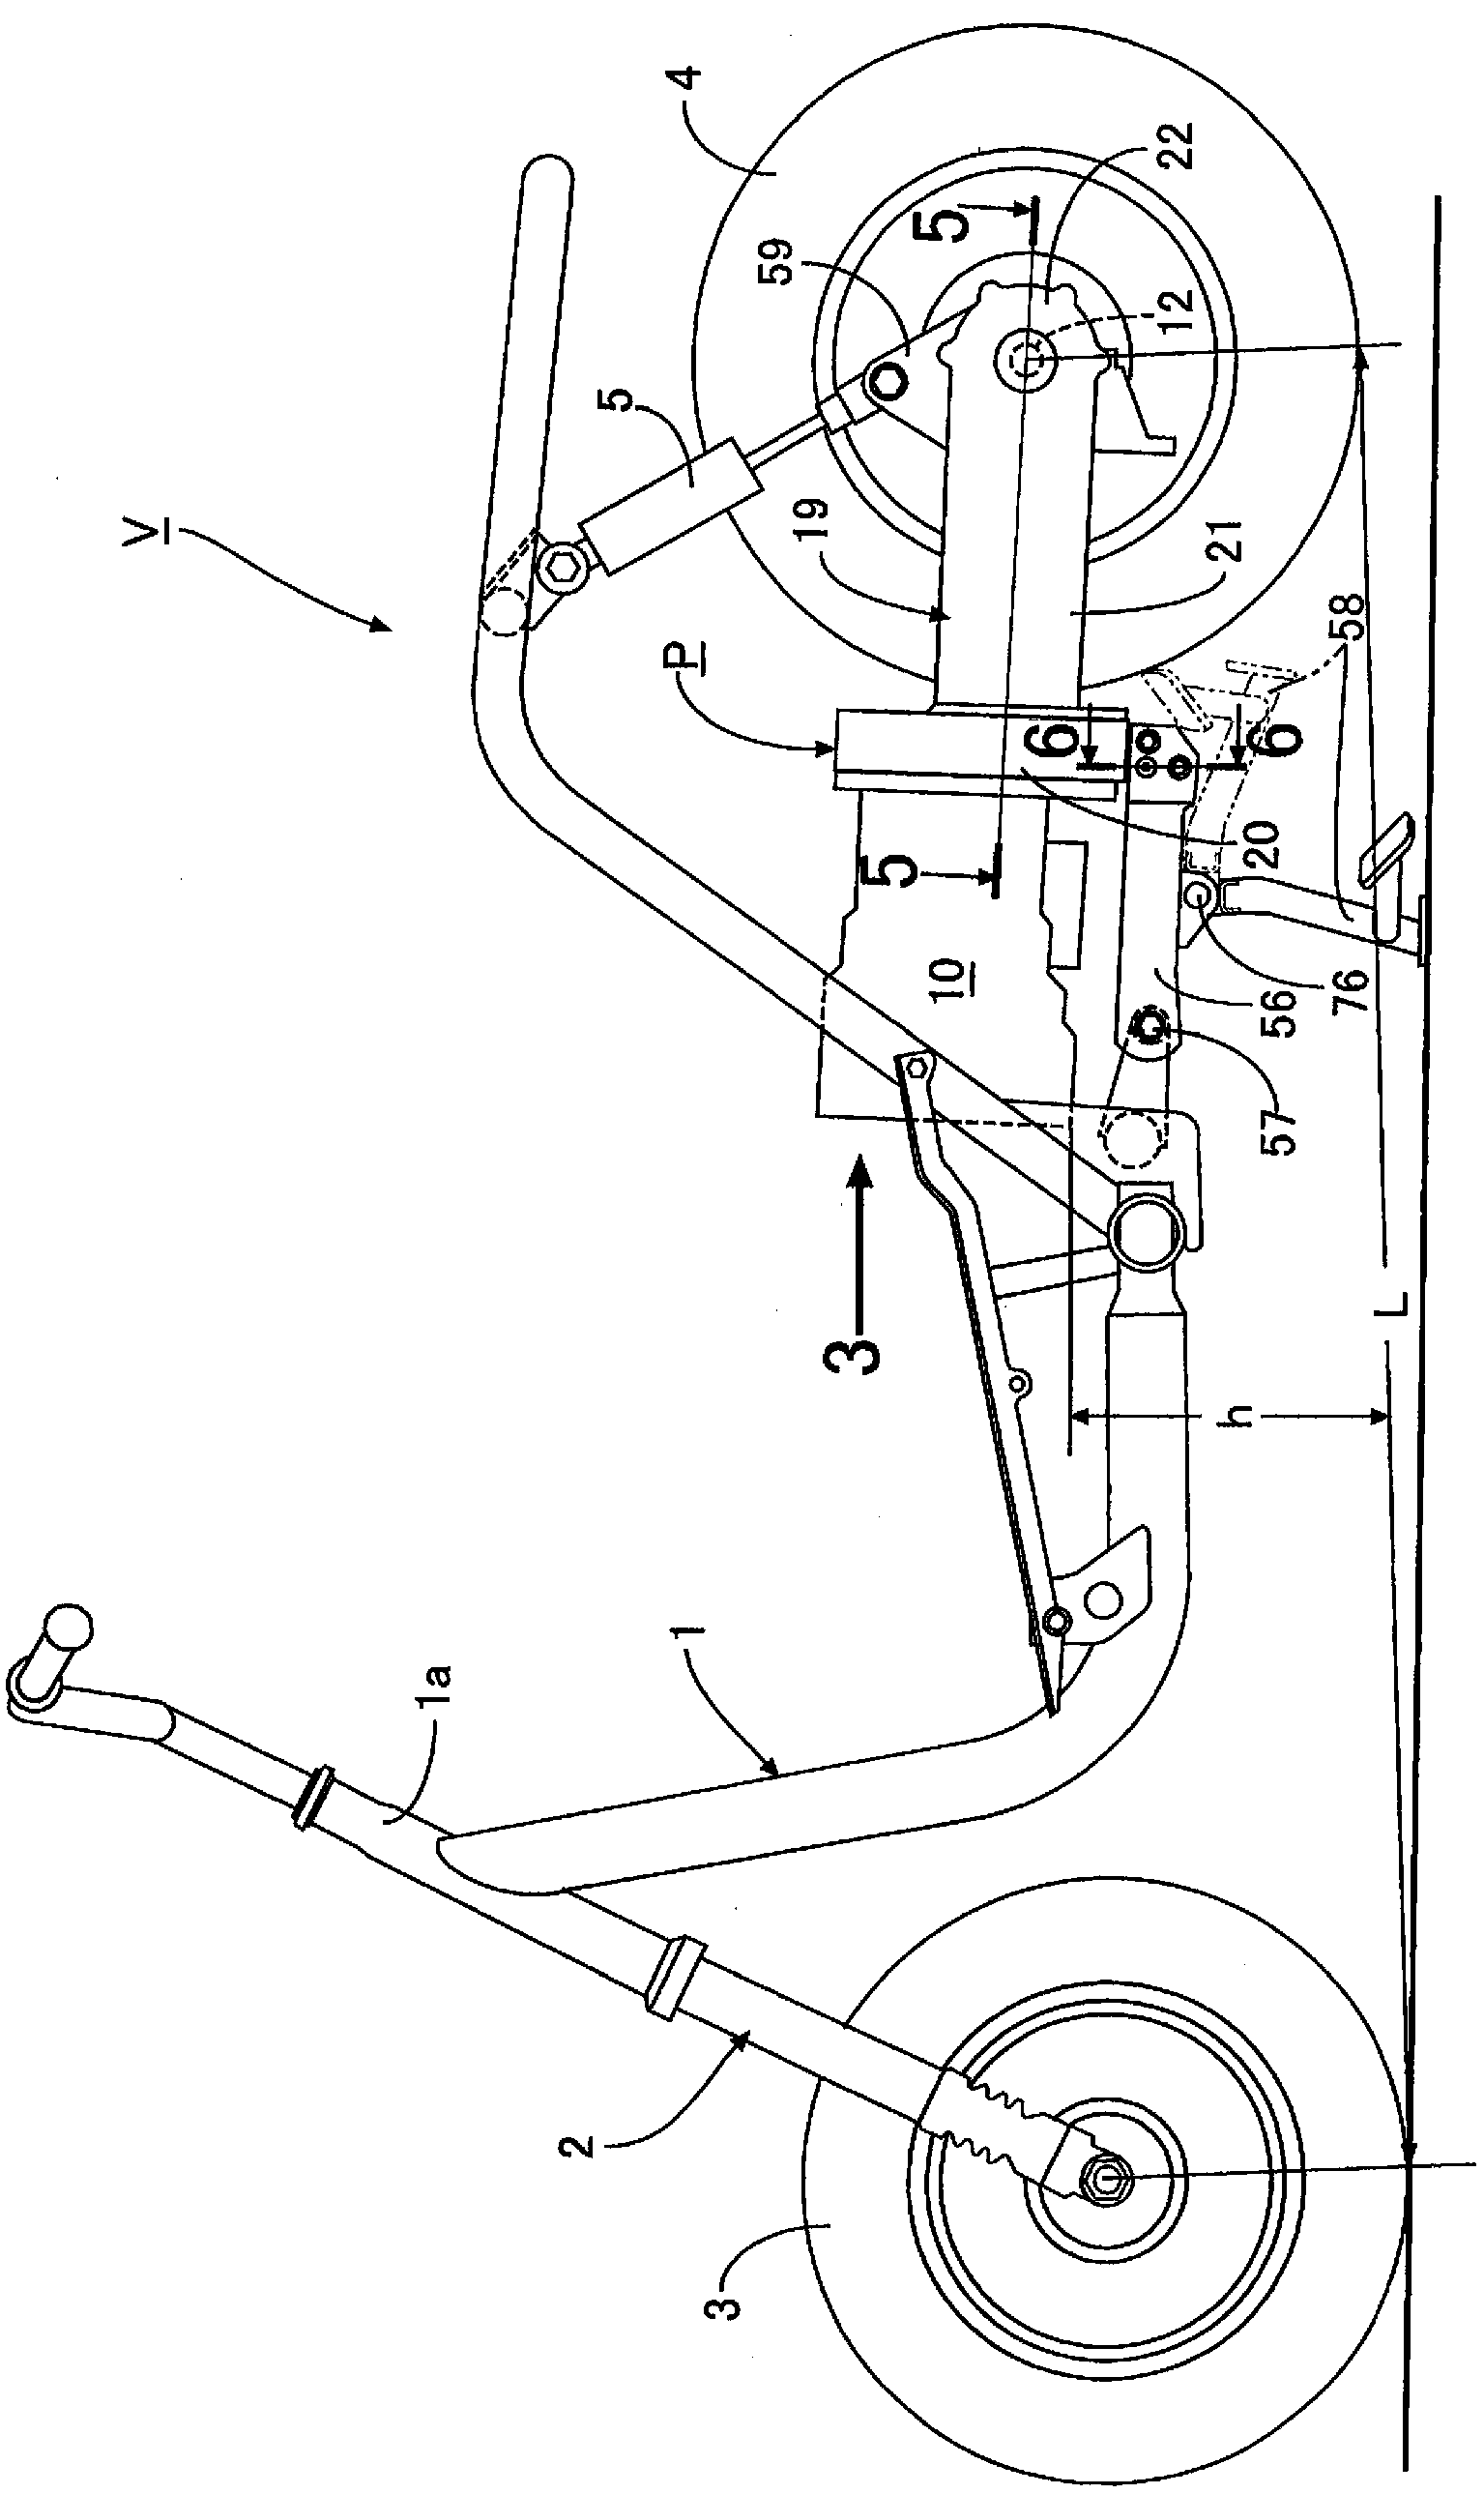 Electric power unit for vehicle